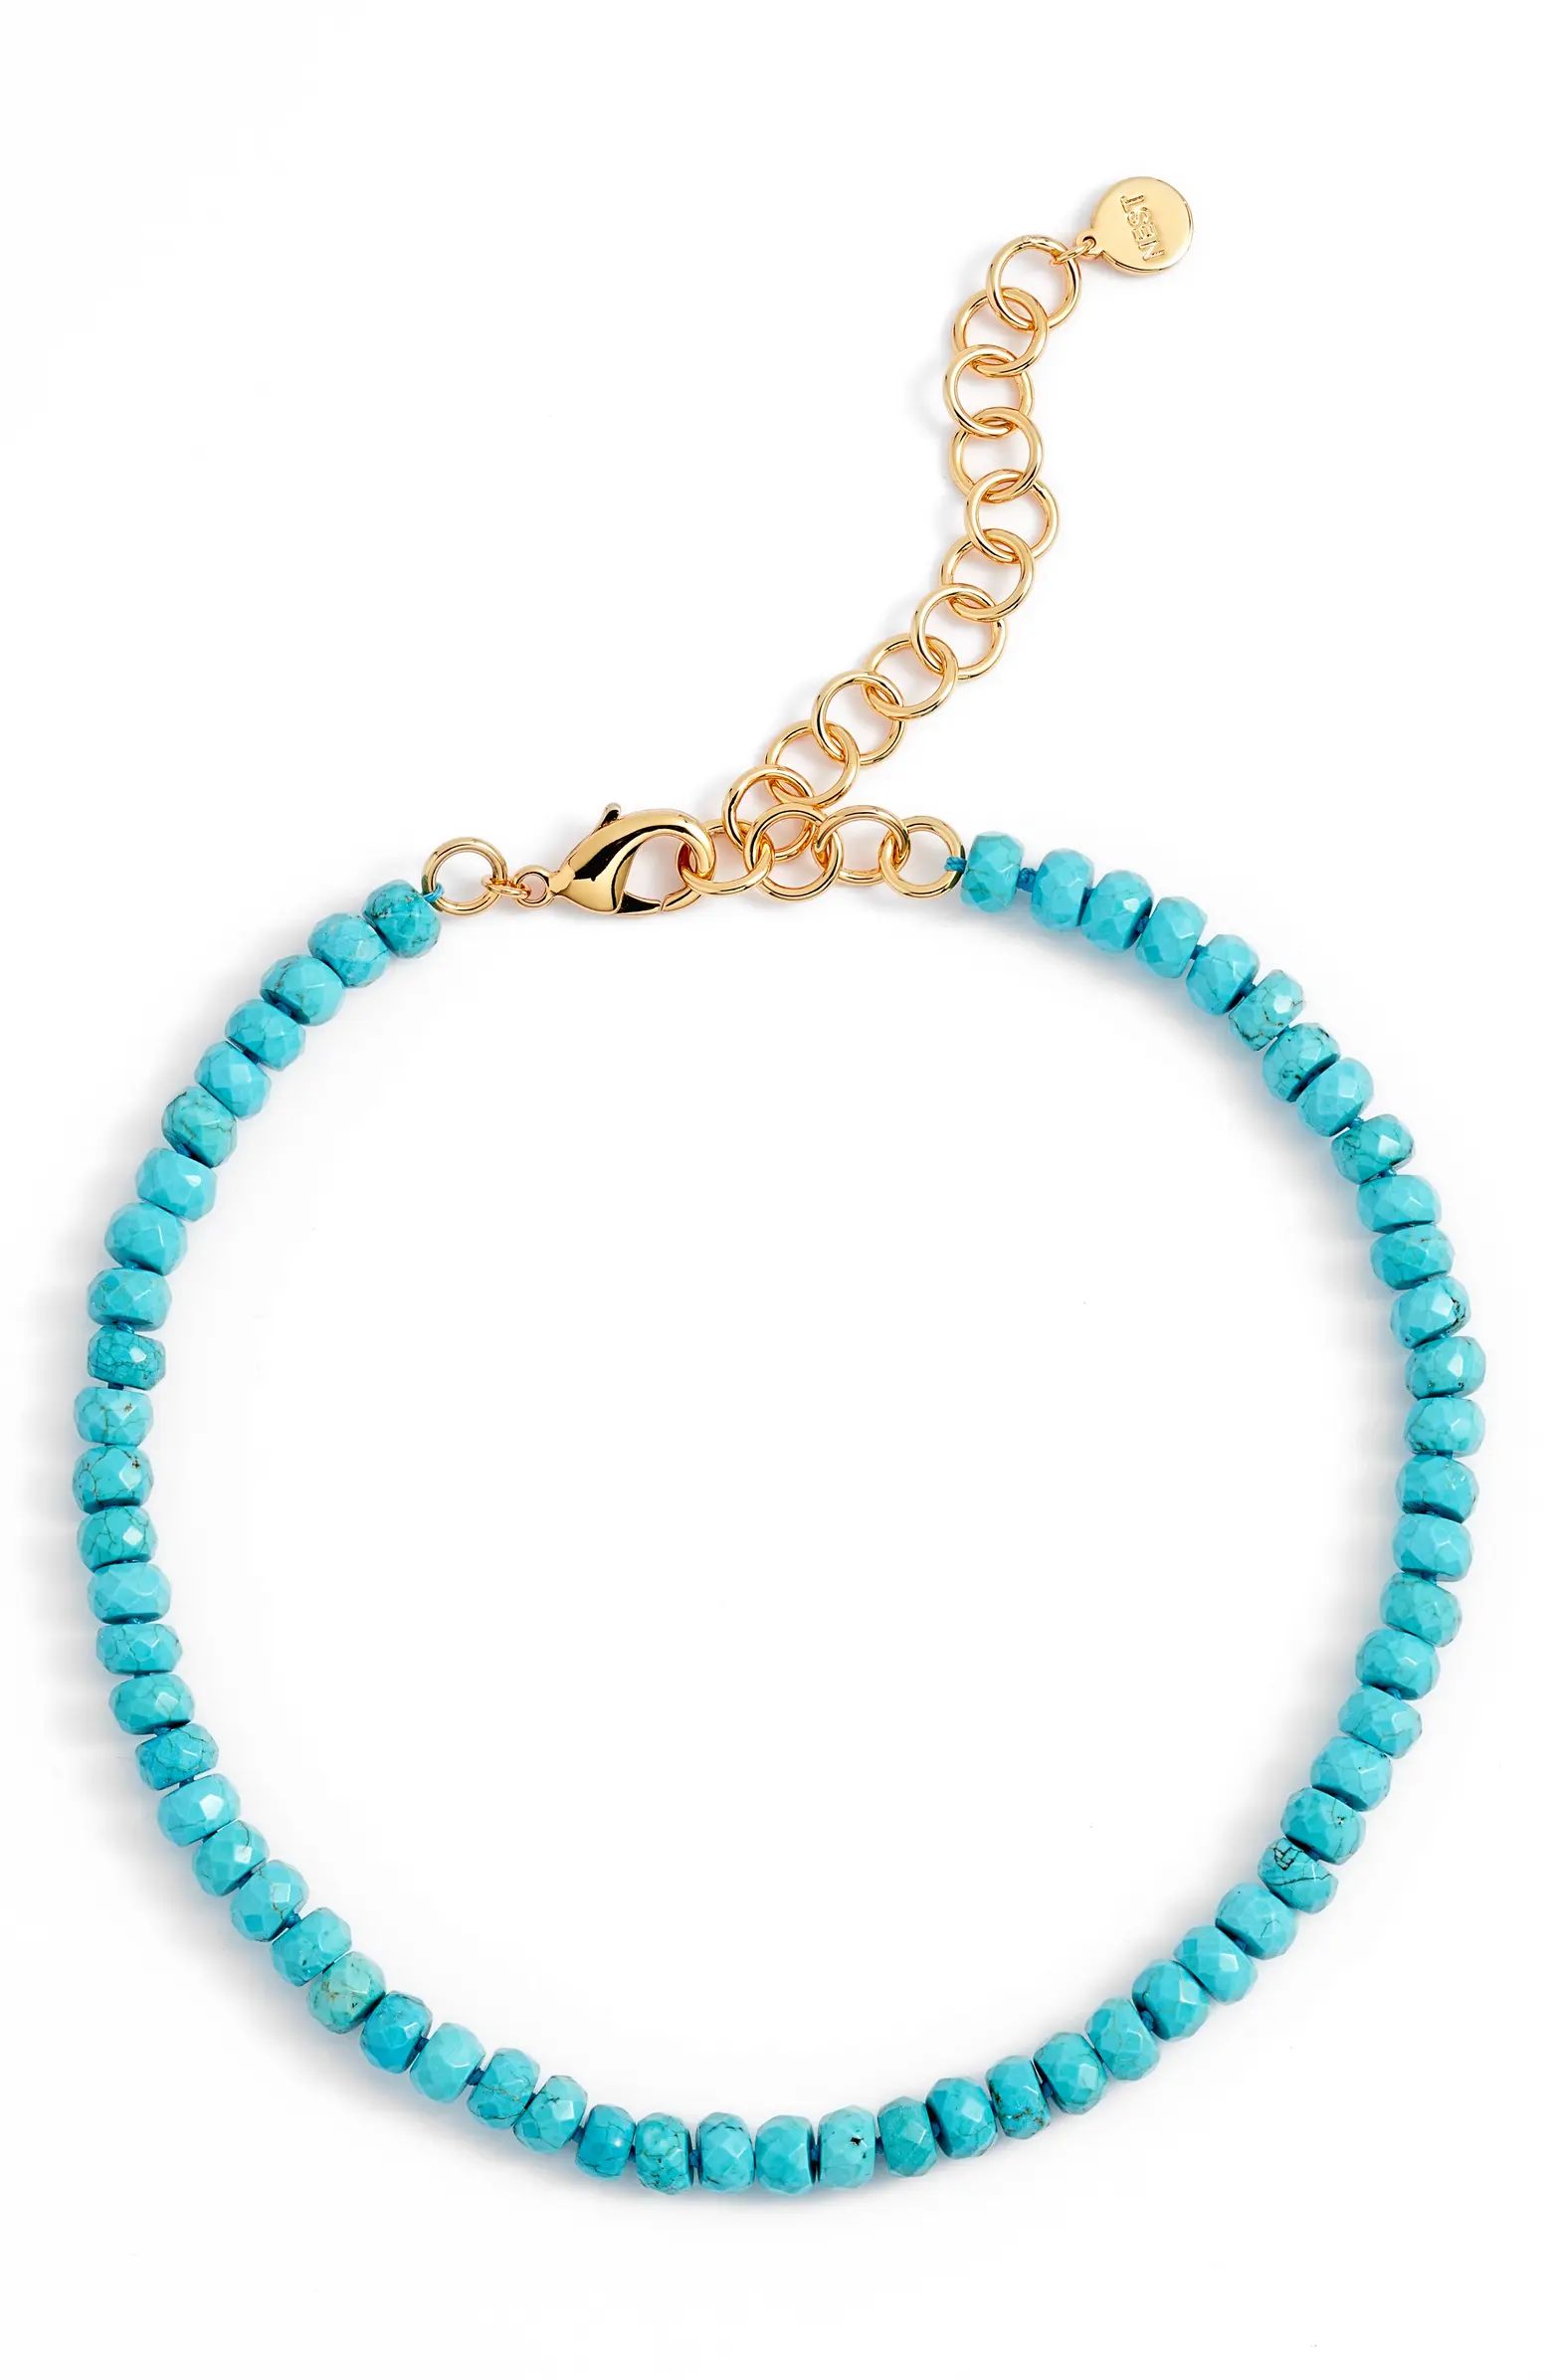 NEST Jewelry Turquoise Beaded Necklace | Nordstrom | Nordstrom